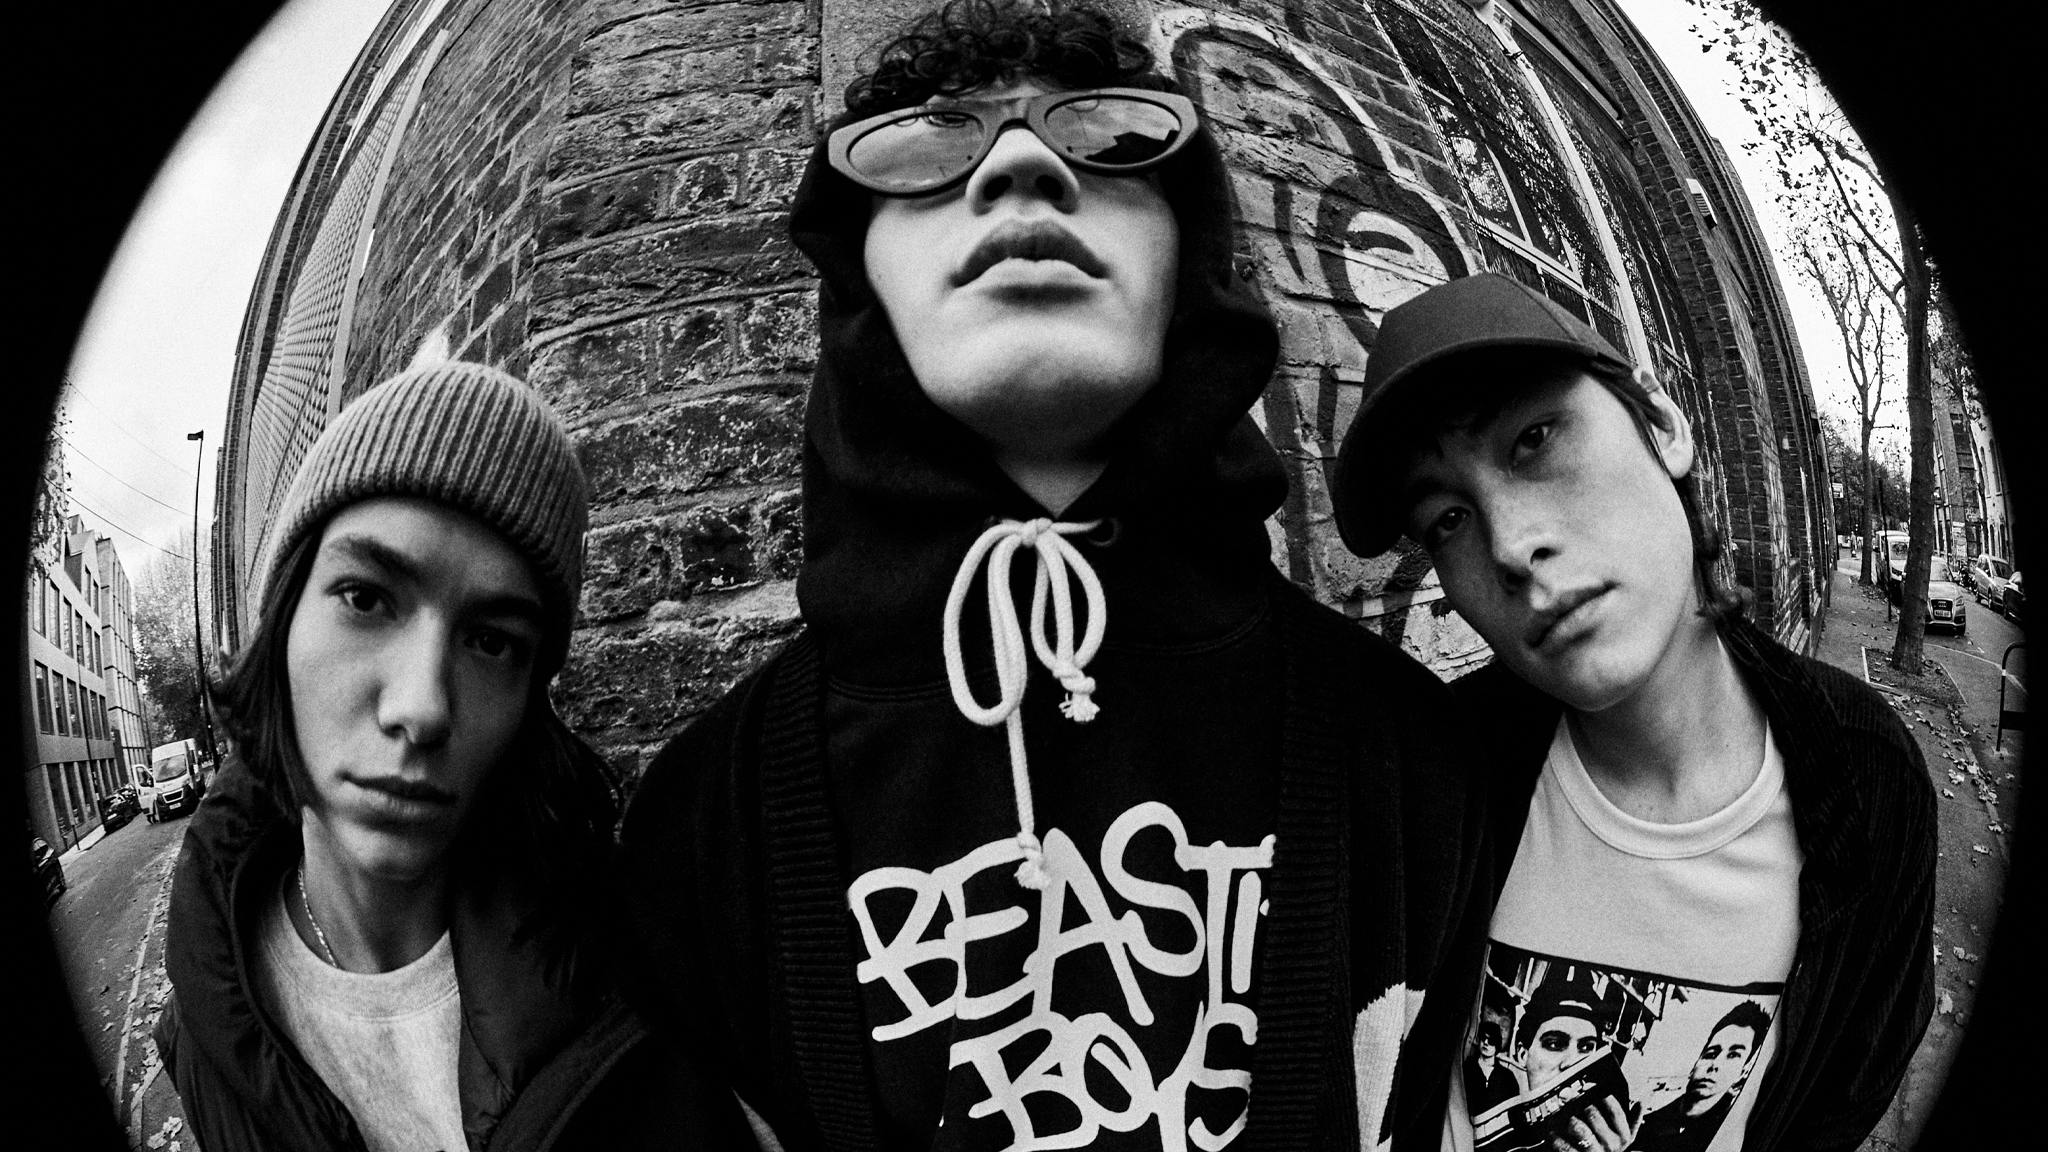 Champion and Beastie Boys team up for Check Your Head anniversary collection